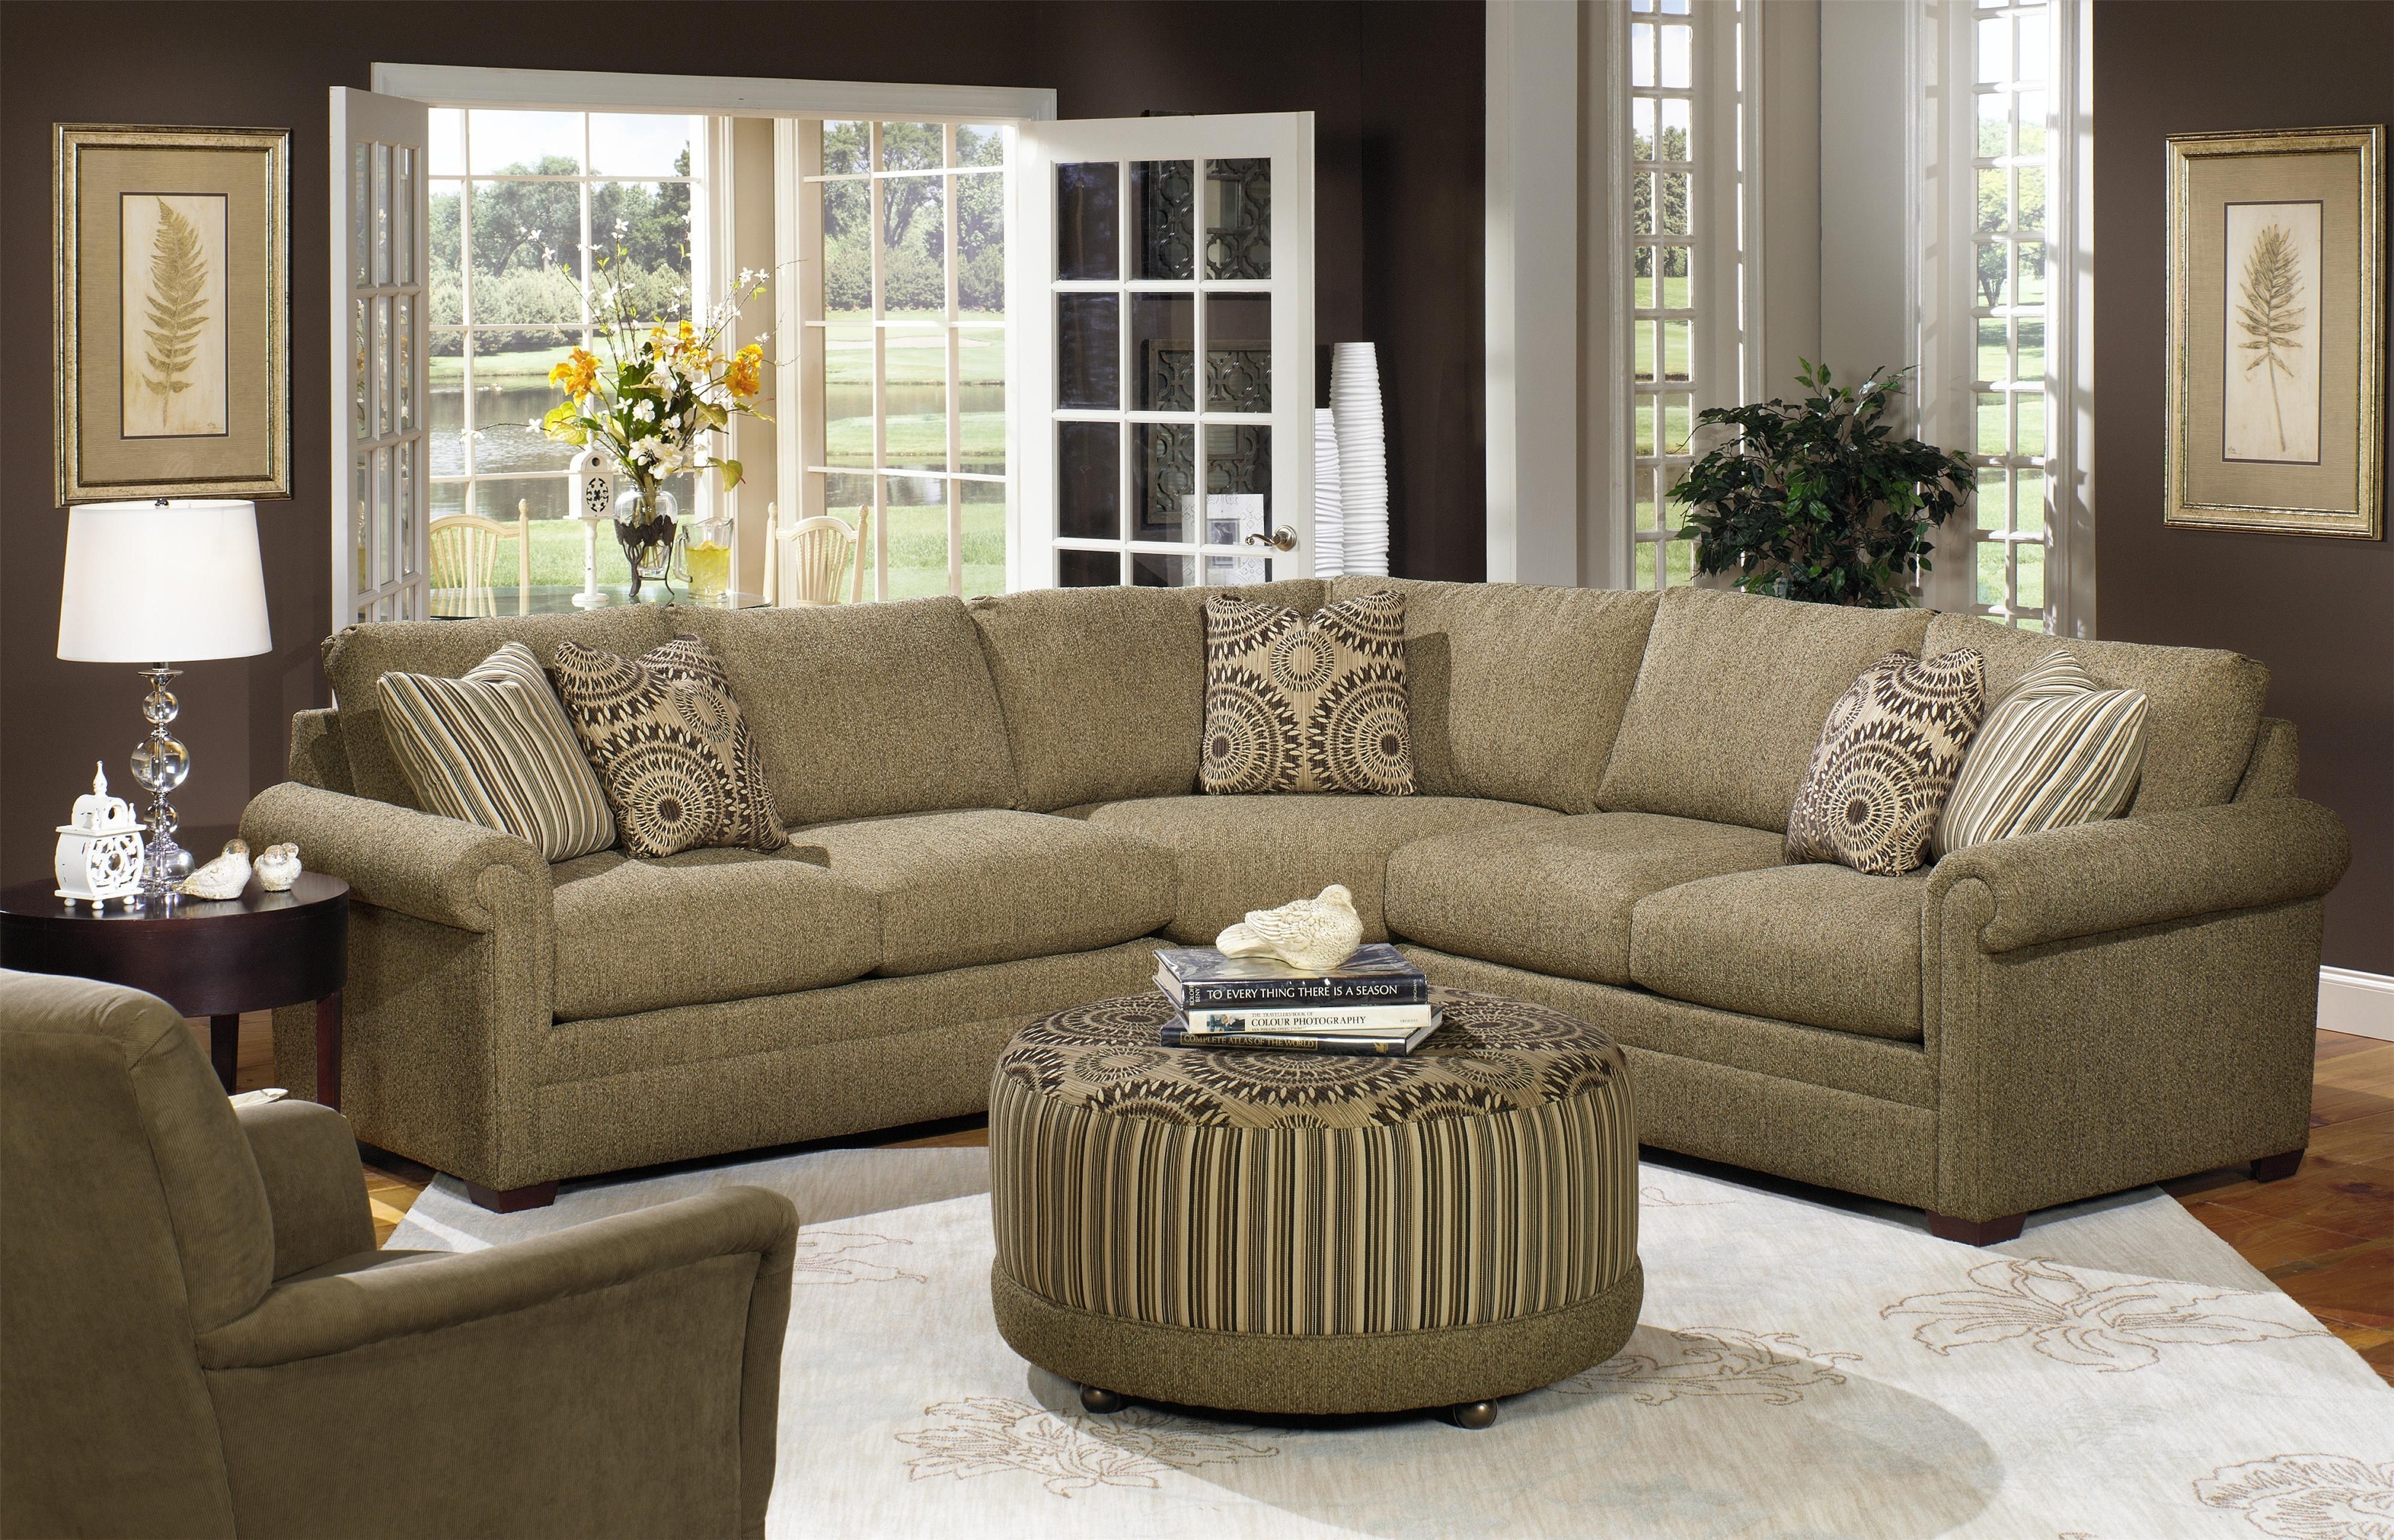 Hickory Craft F9 Custom Collection <b>customizable</b> 3 Piece Regarding Adeline 3 Piece Sectionals (View 22 of 30)